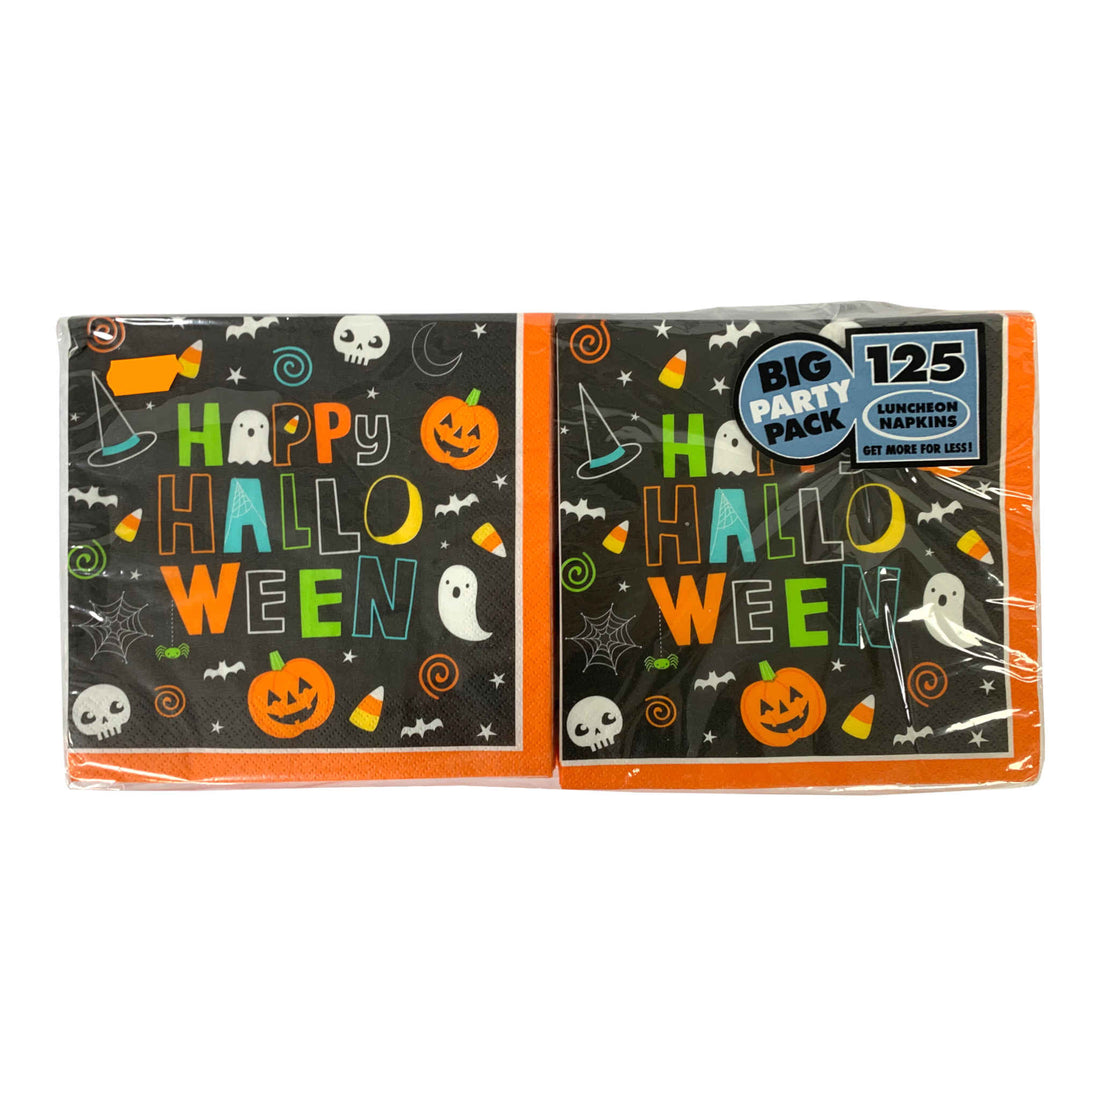 Luncheon Napkins Happy Halloween 2ply | 125 Pack